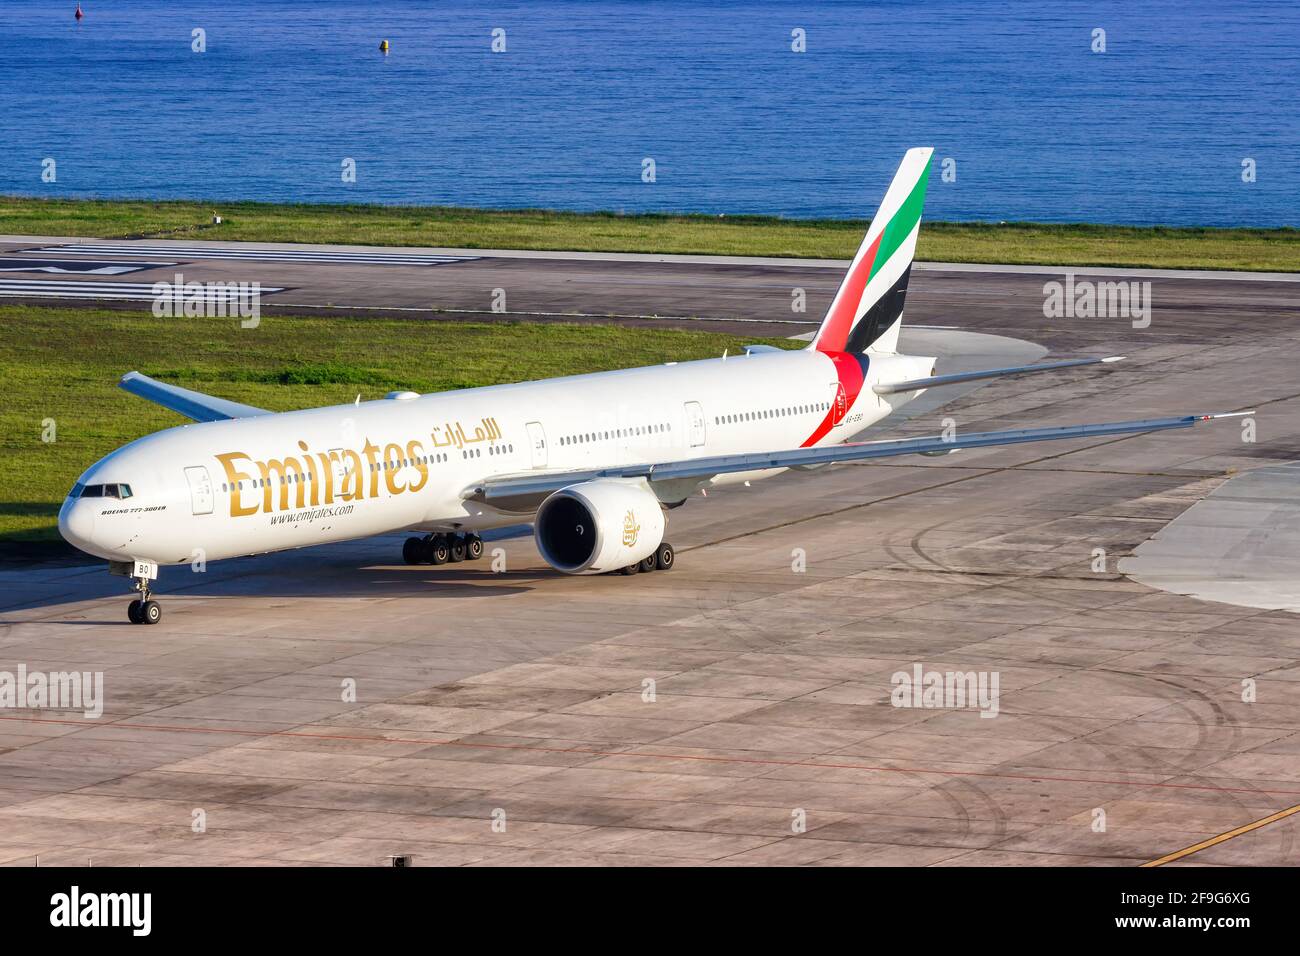 Mahe, Seychelles - November 24, 2017: Emirates Boeing 777 airplane at Seychelles International Airport (SEZ) in the Seychelles. Boeing is an American Stock Photo